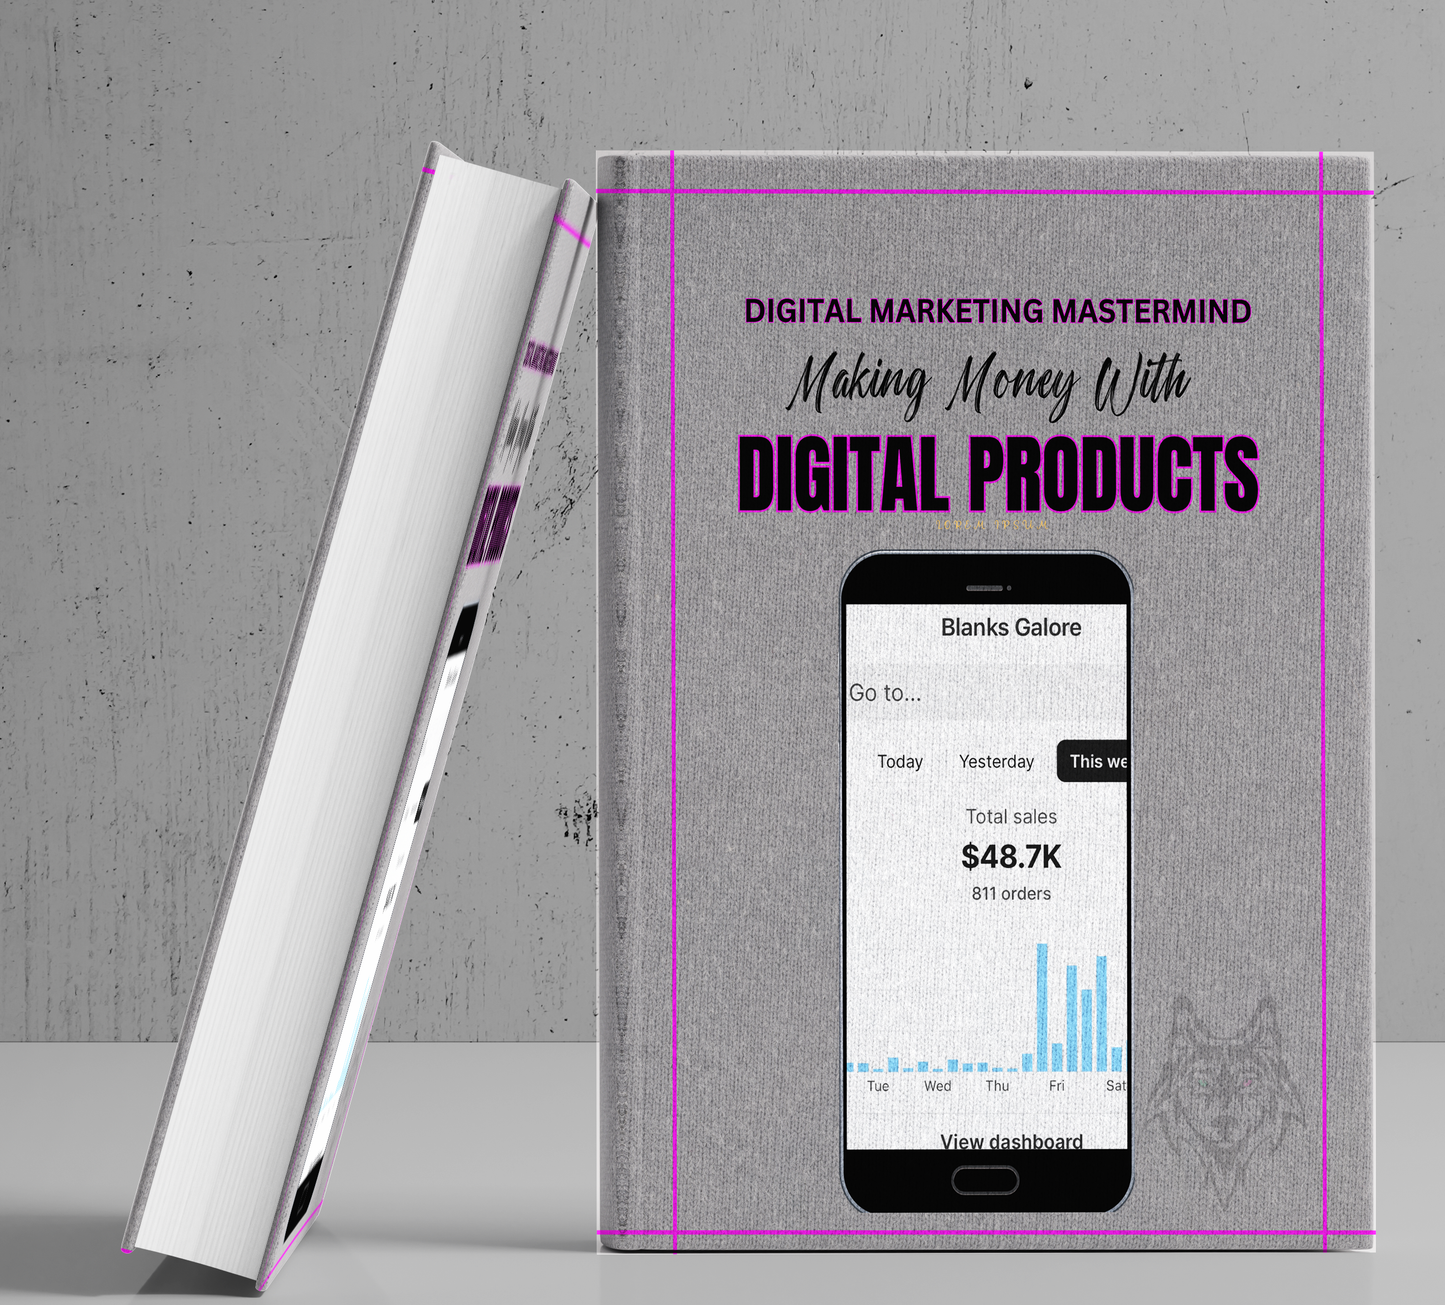 FREE EBOOK: How To Make Money With Digital Products Ebook (digital download only)